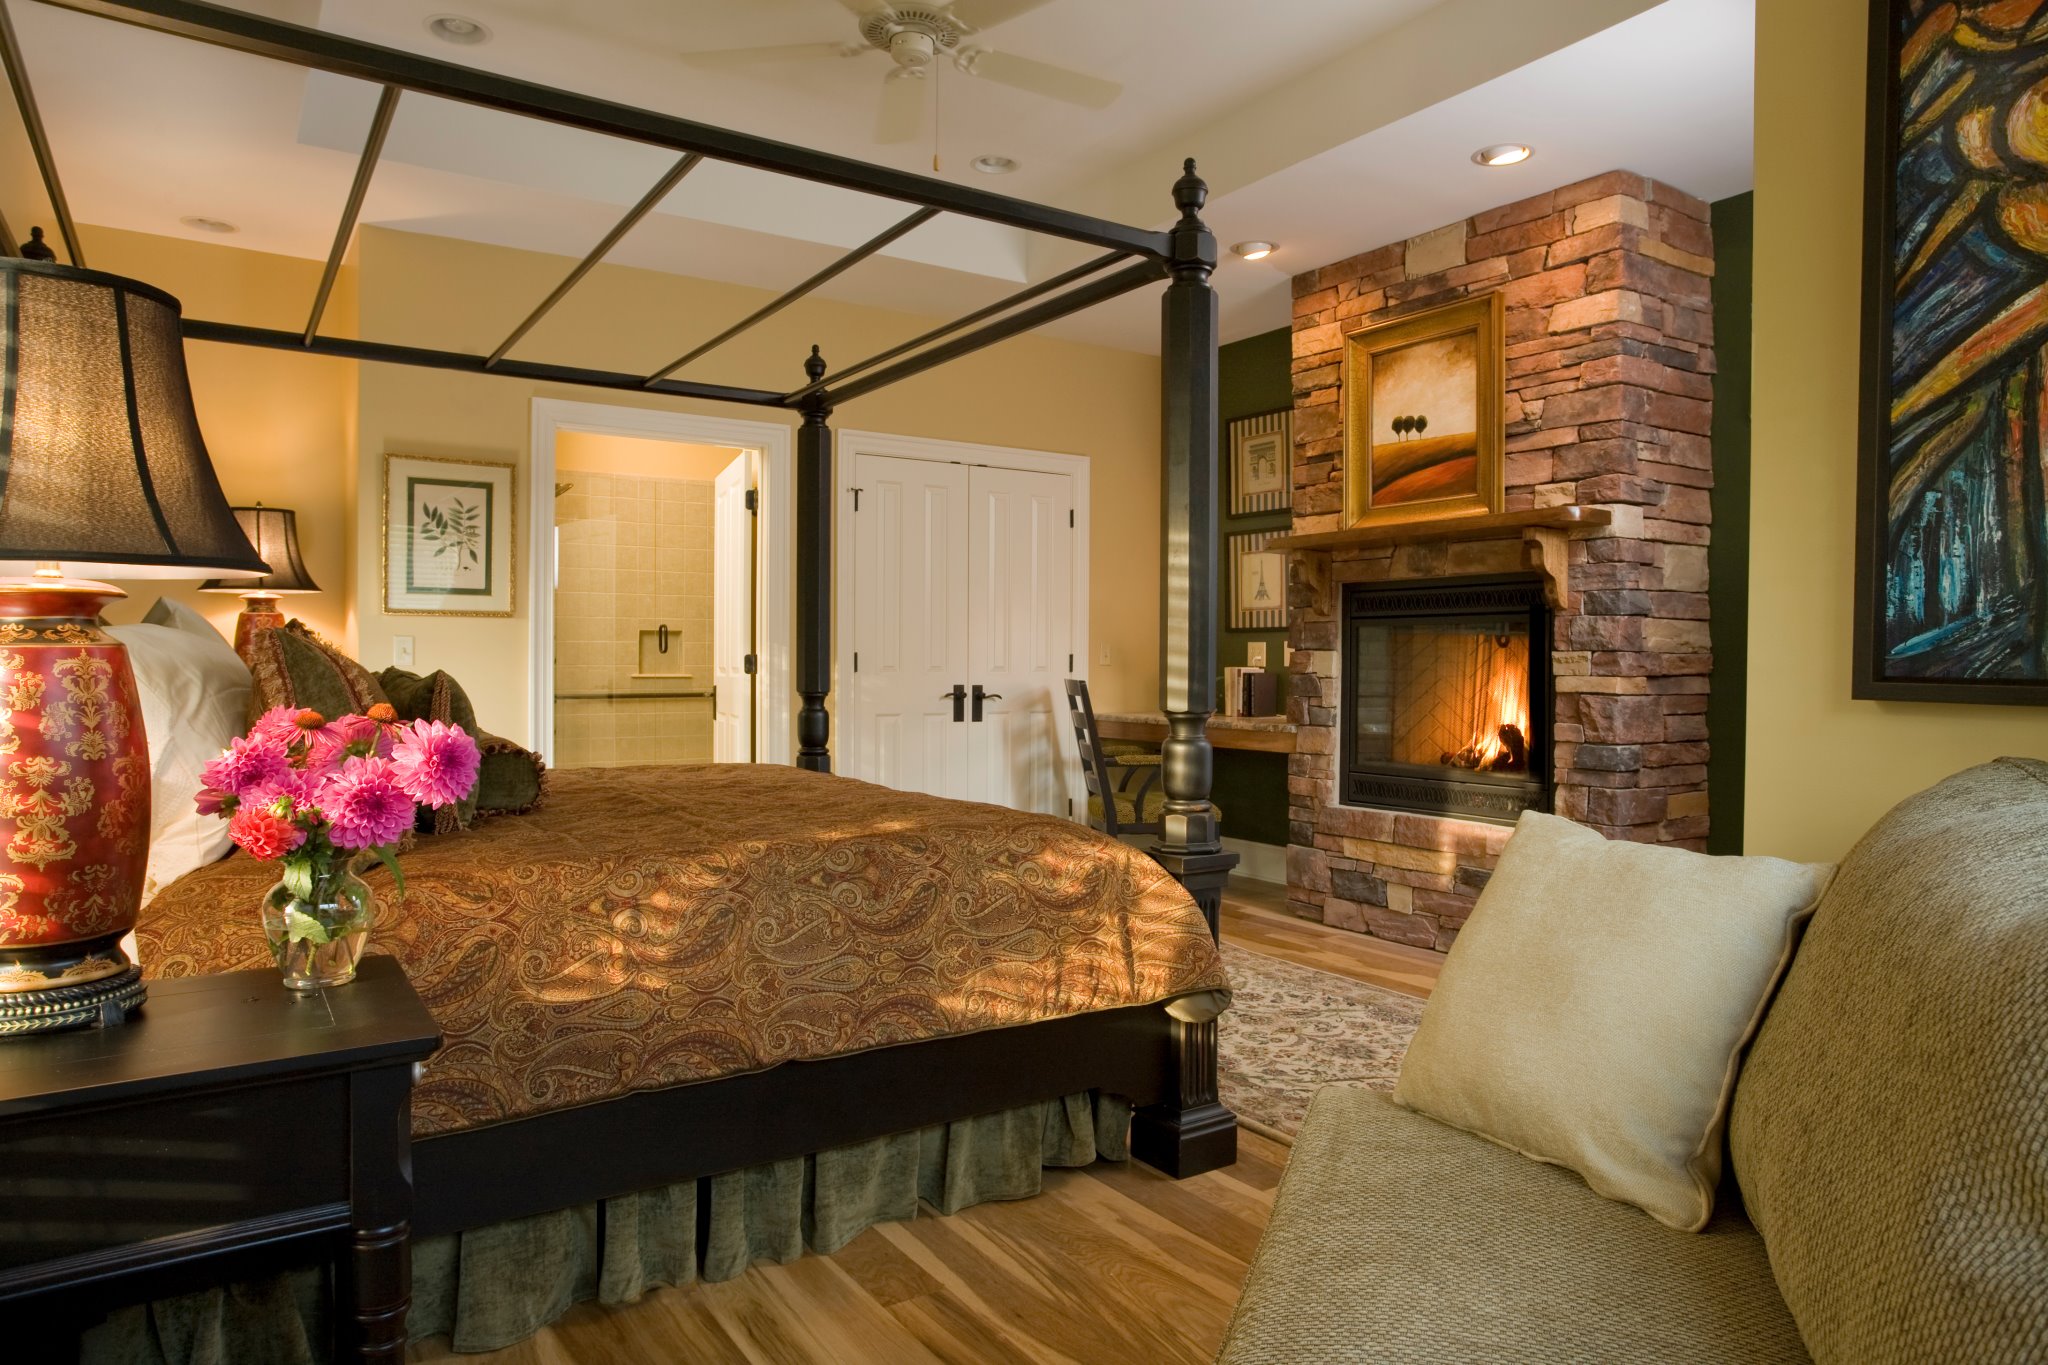 20 Of The Coziest Inns To Visit This Christmas Season